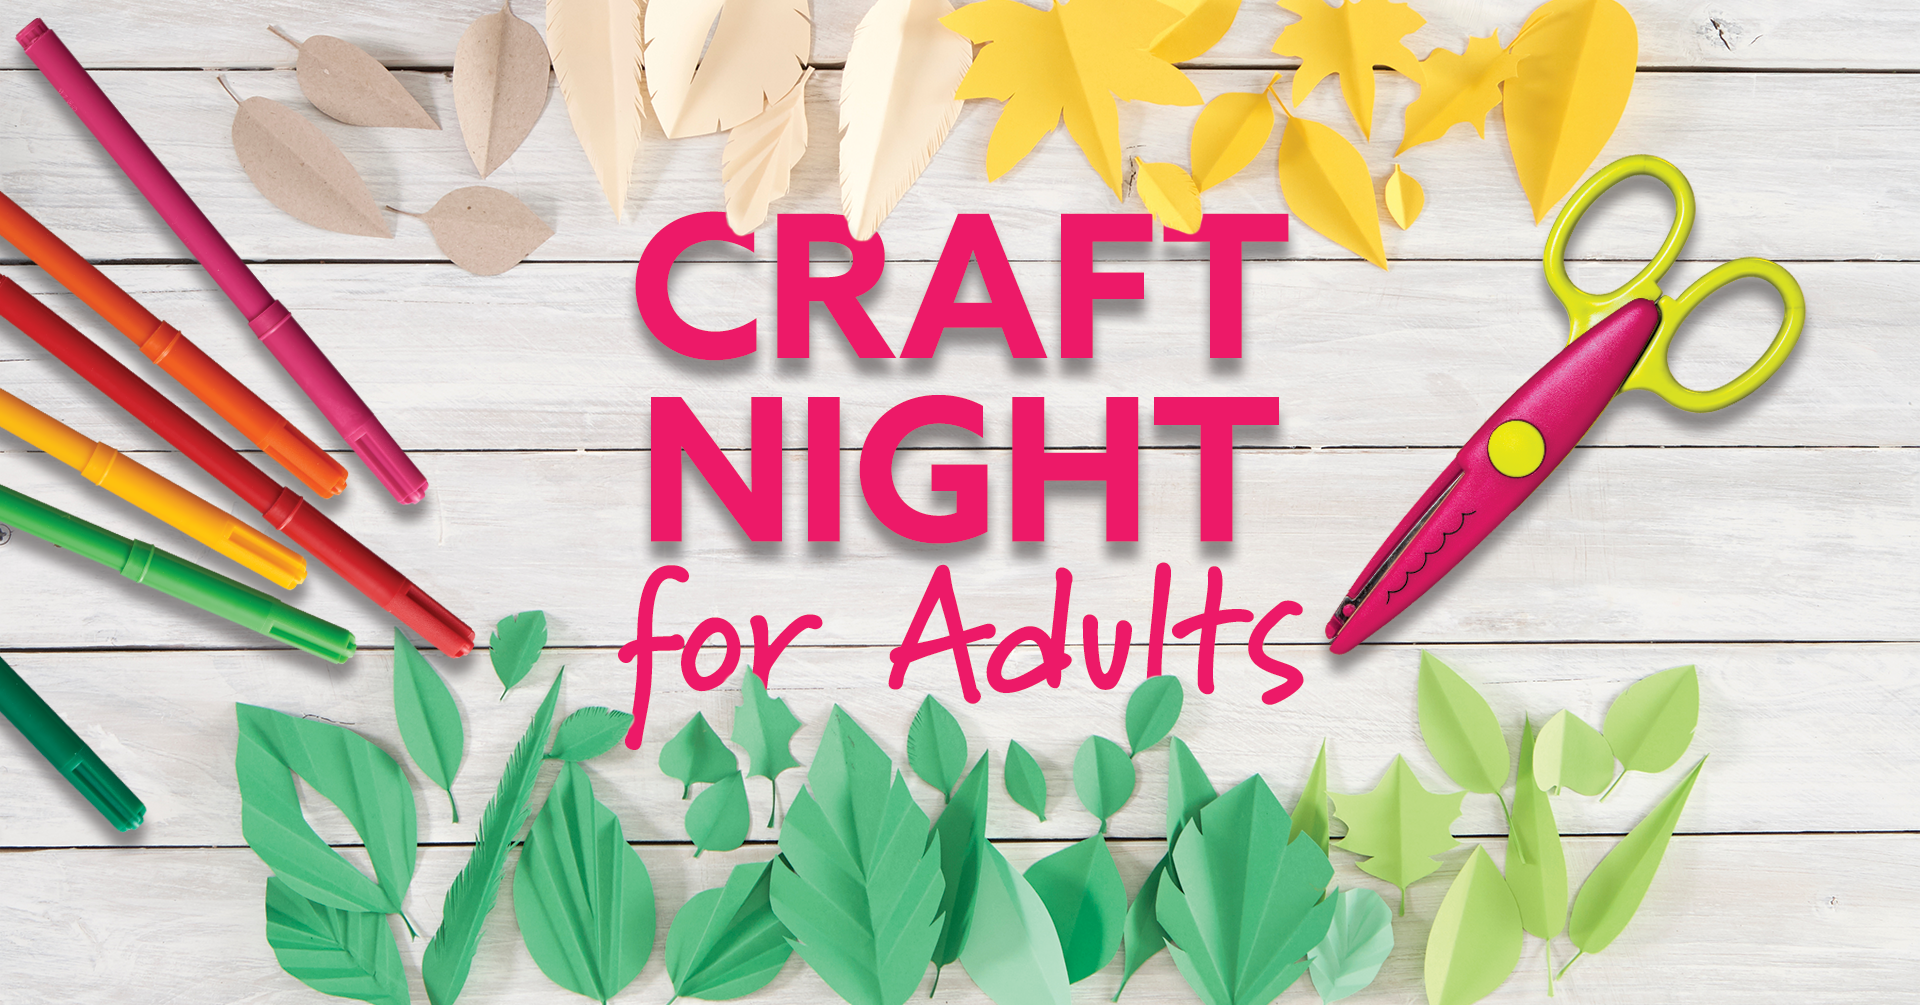 Craft Night for Adults in the Town of Thompson on August 3rd